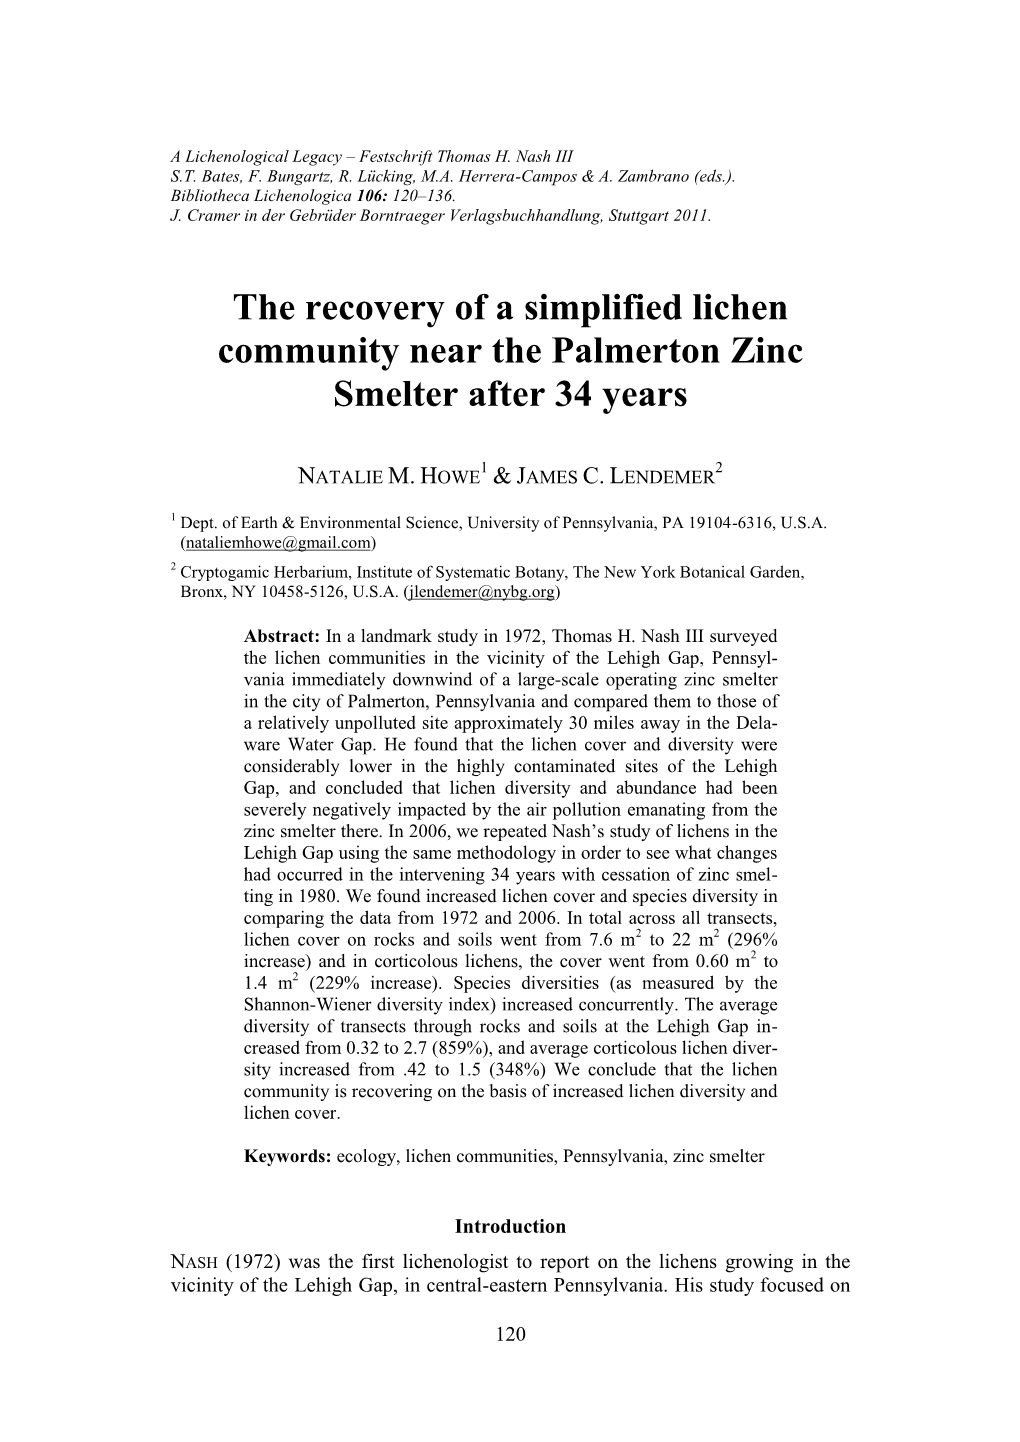 The Recovery of a Simplified Lichen Community Near the Palmerton Zinc Smelter After 34 Years